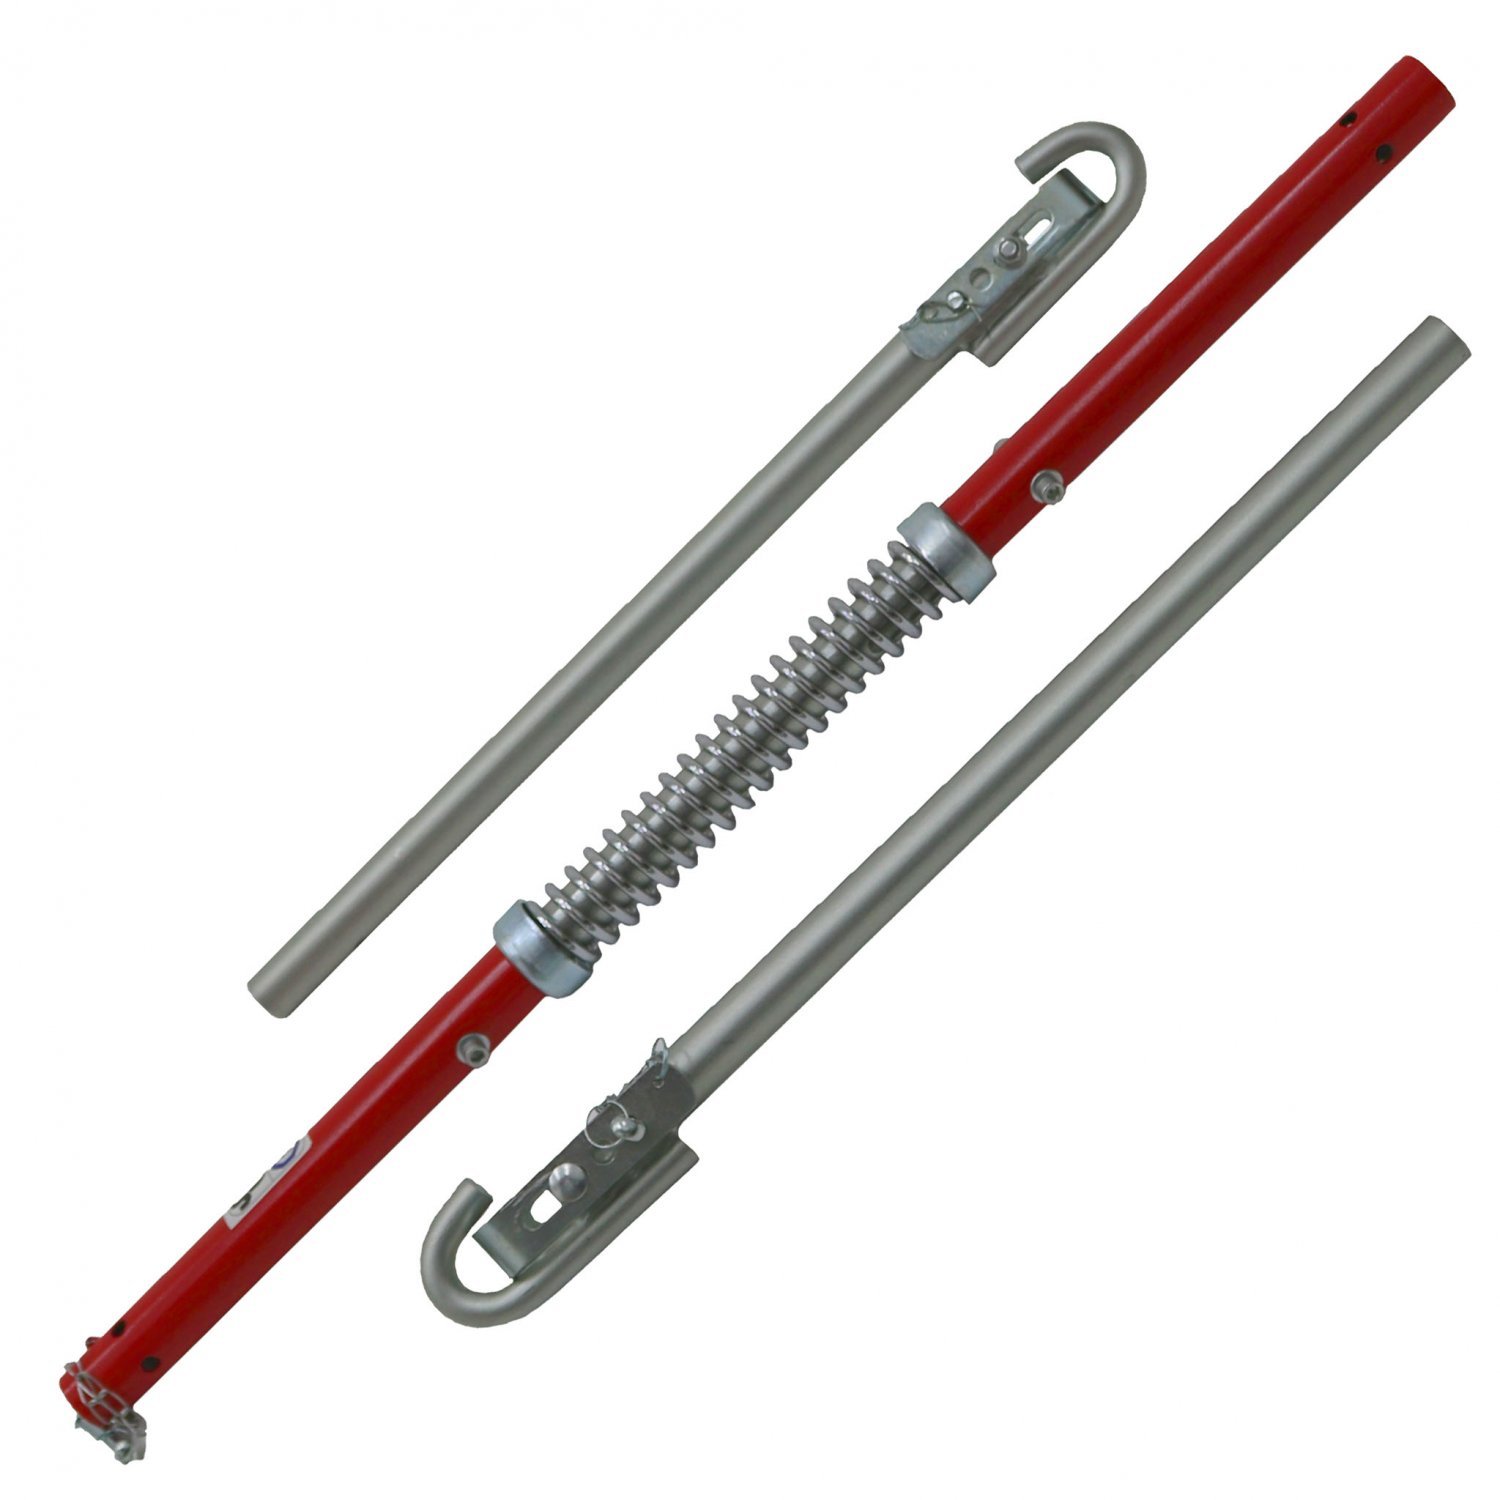 Size:3t Lanpangzi Heavy Duty Car Recovery Tow Pole 3t 5t 6t Thickened Bold Spring Car Tow Bar Towing Car Spring Safety Buffer Anti Rear End Collision Emergency Breakdown 